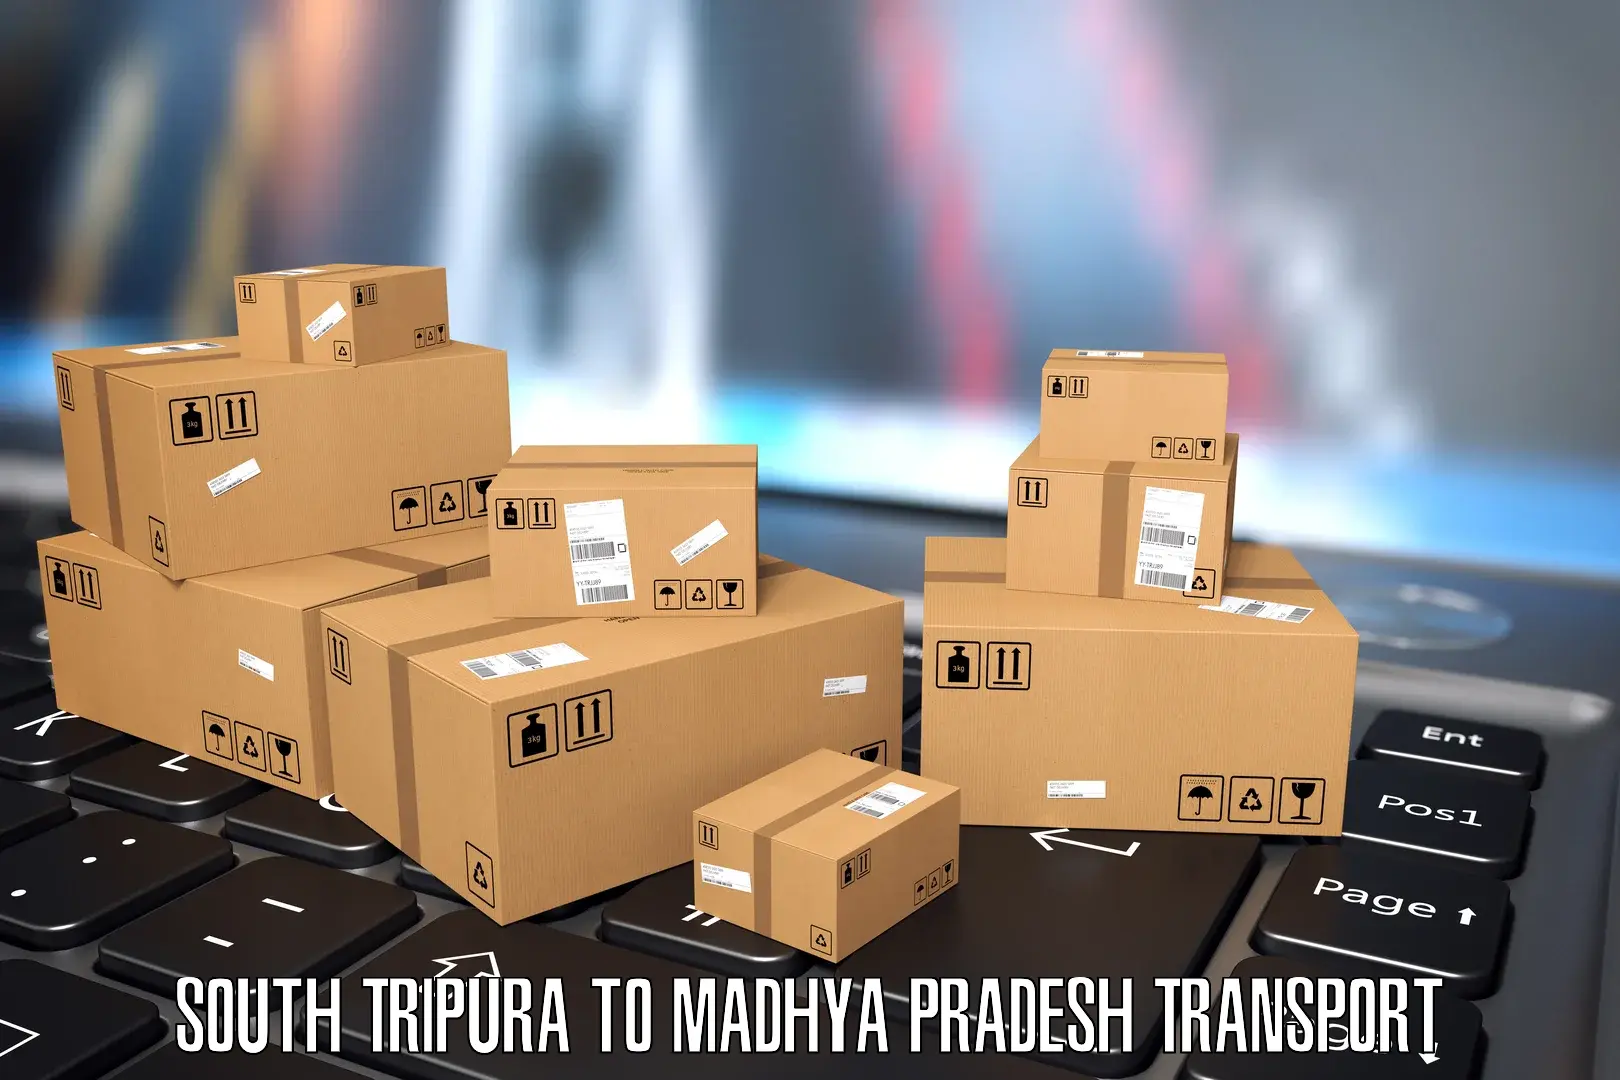 Express transport services South Tripura to Thikri